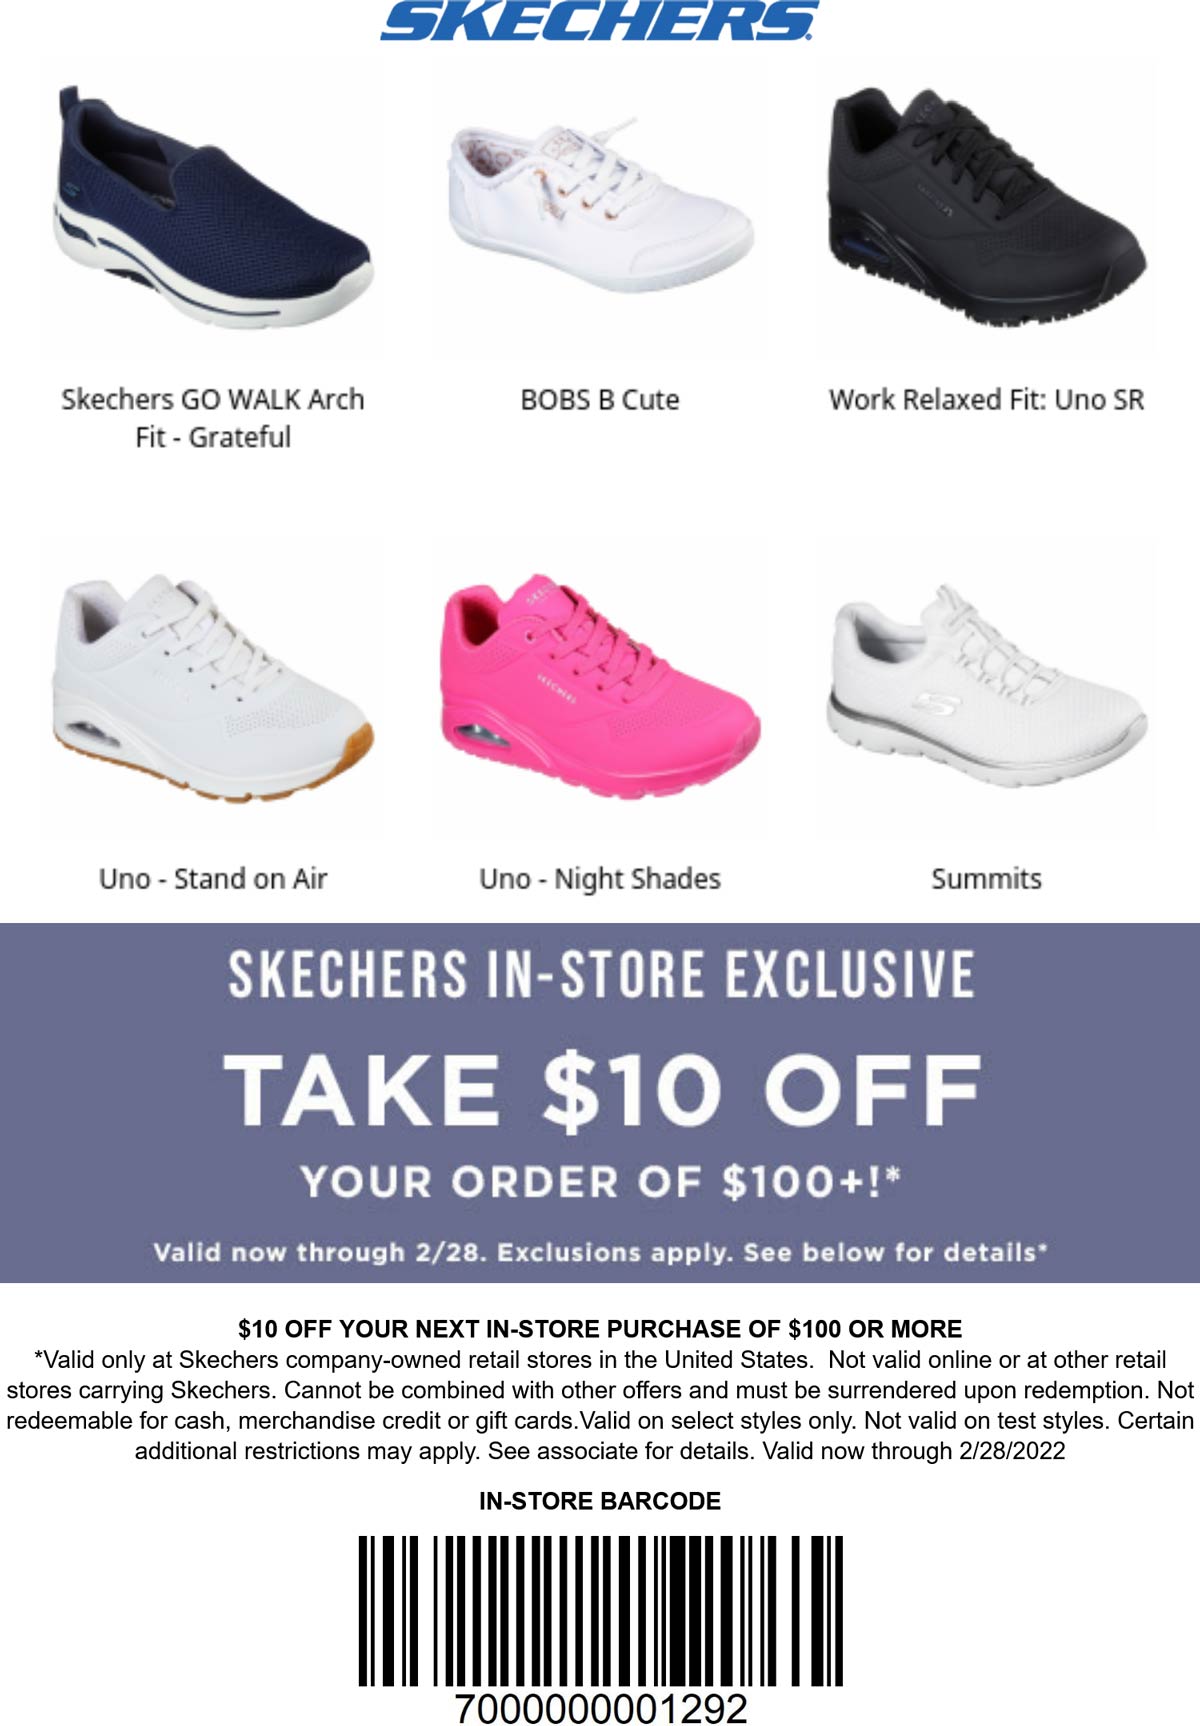 Skechers stores Coupon  $10 off $100 at Skechers shoes #skechers 